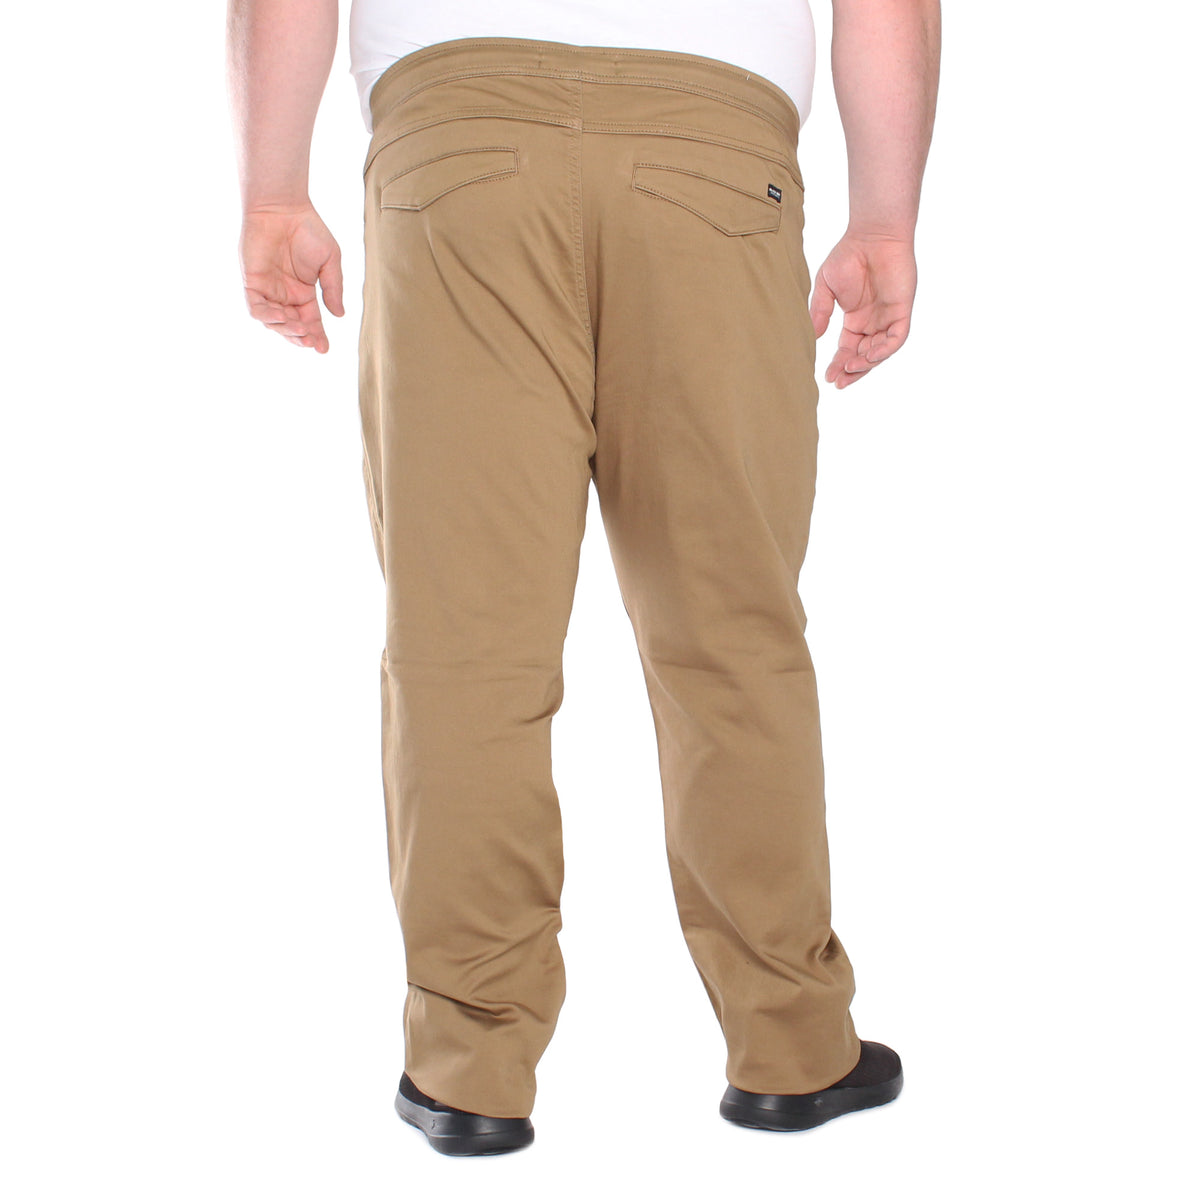 Jogger Style Pant